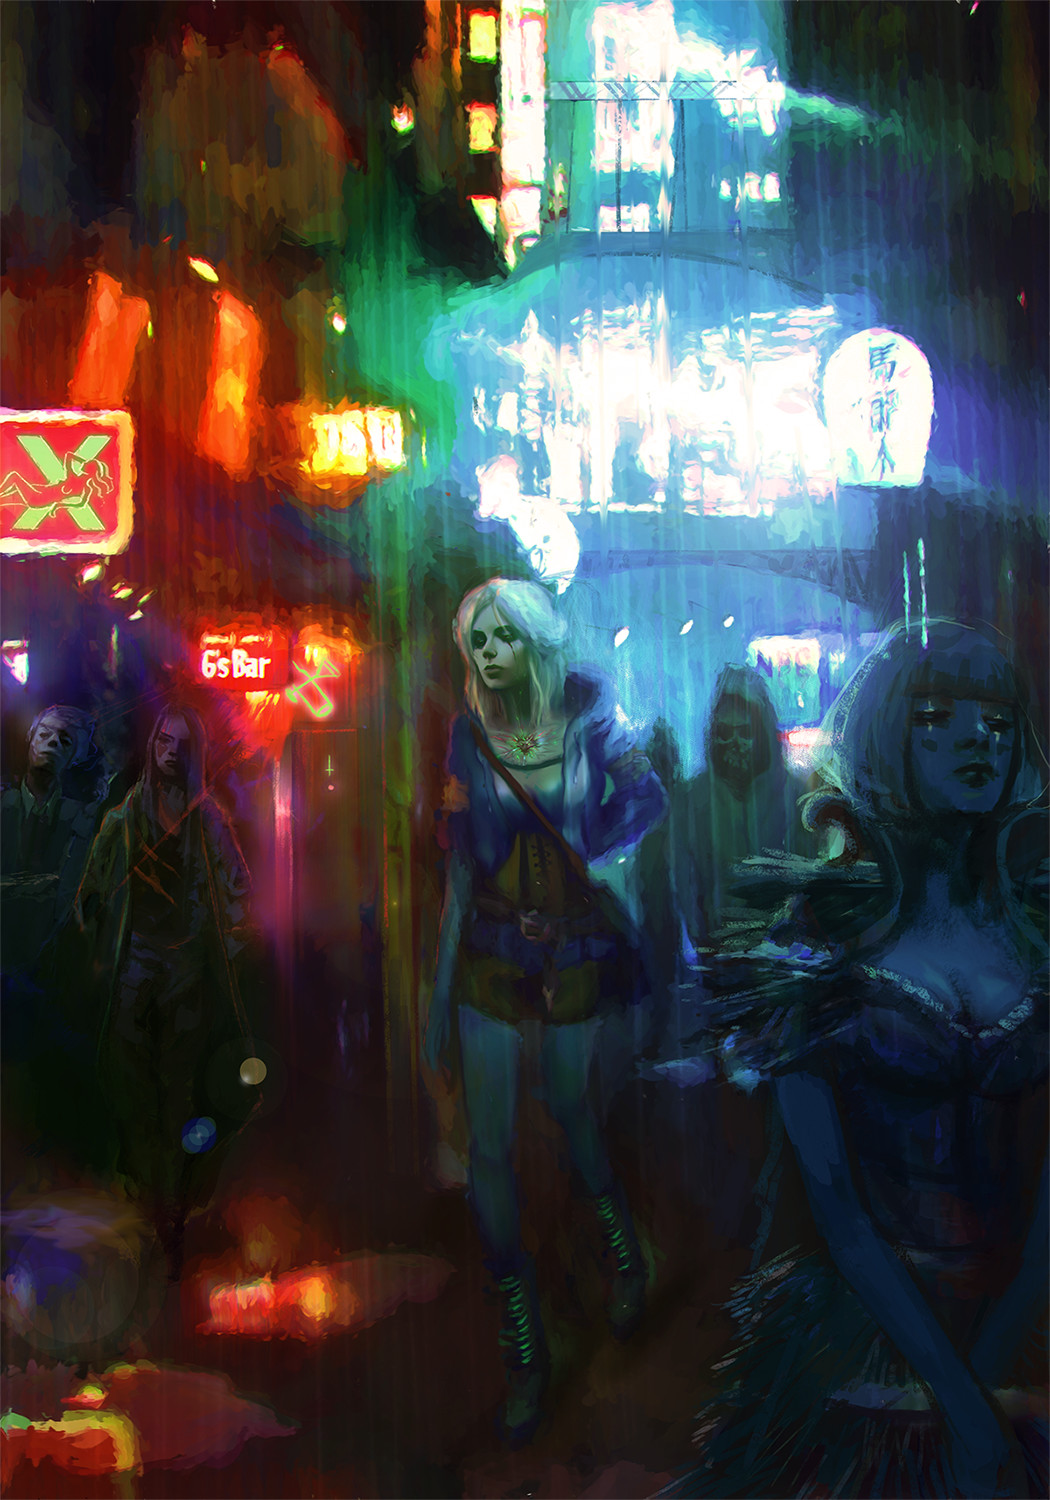 General 1050x1500 fantasy art artwork digital art video game art cyberpunk The Witcher The Witcher 3: Wild Hunt Cirilla Fiona Elen Riannon video games neon portrait display signs city cleavage bar walking video game girls video game characters Marty Zych